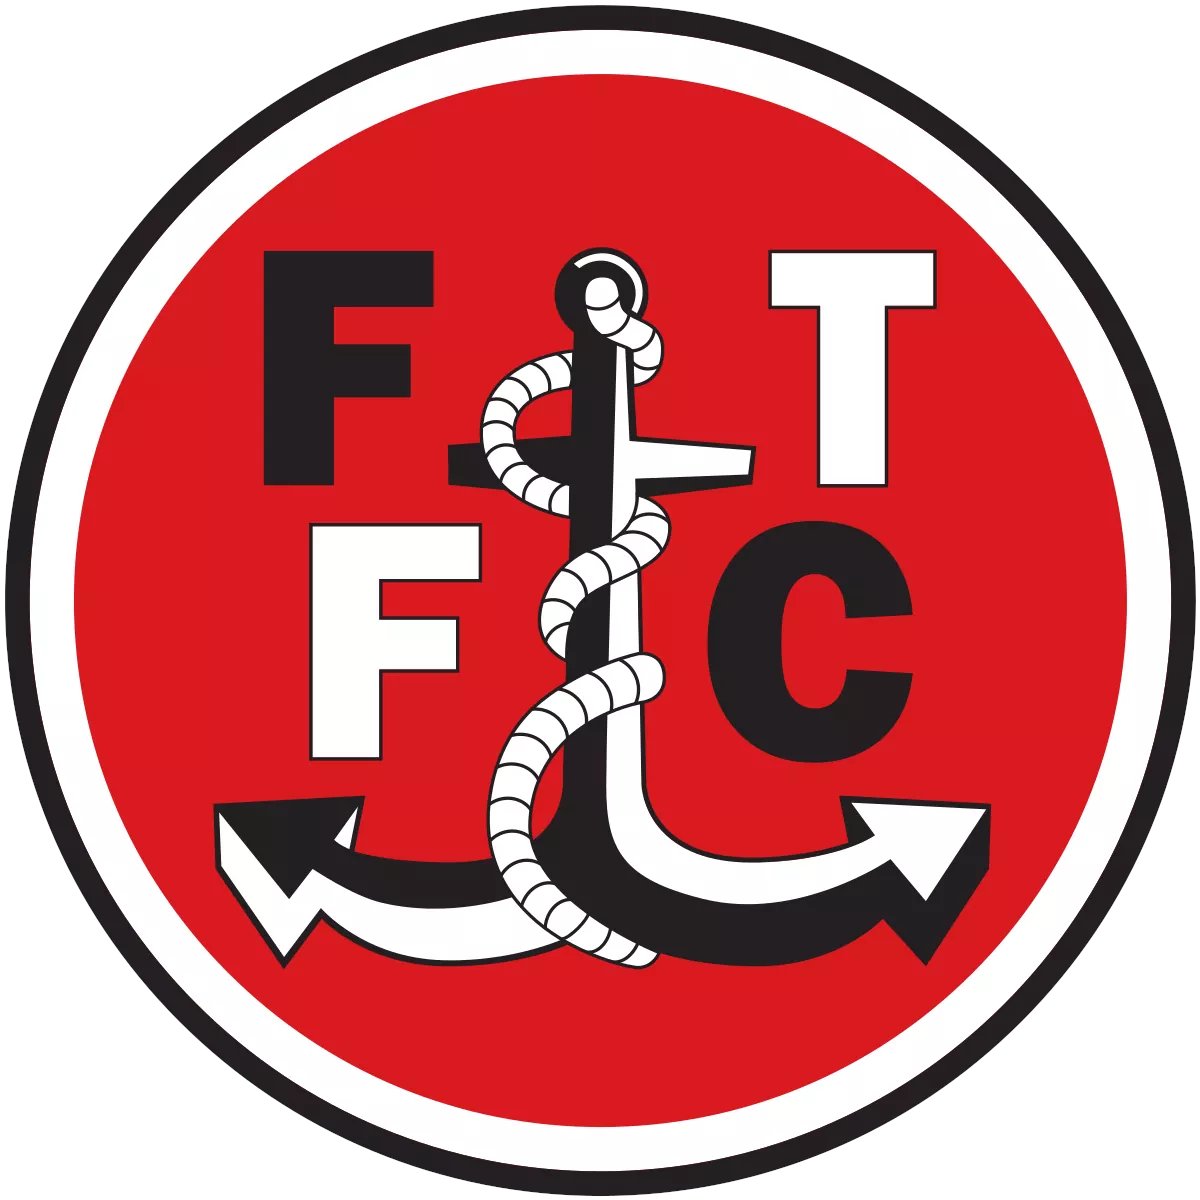 87) Fleetwood Town F.C. Points: 34 Seriously these teams are absolute dross, and this is no exception. Where even is Fleetwood?? People who live there probably don't know. They now have Karl Robinson as manager though, which is nice.